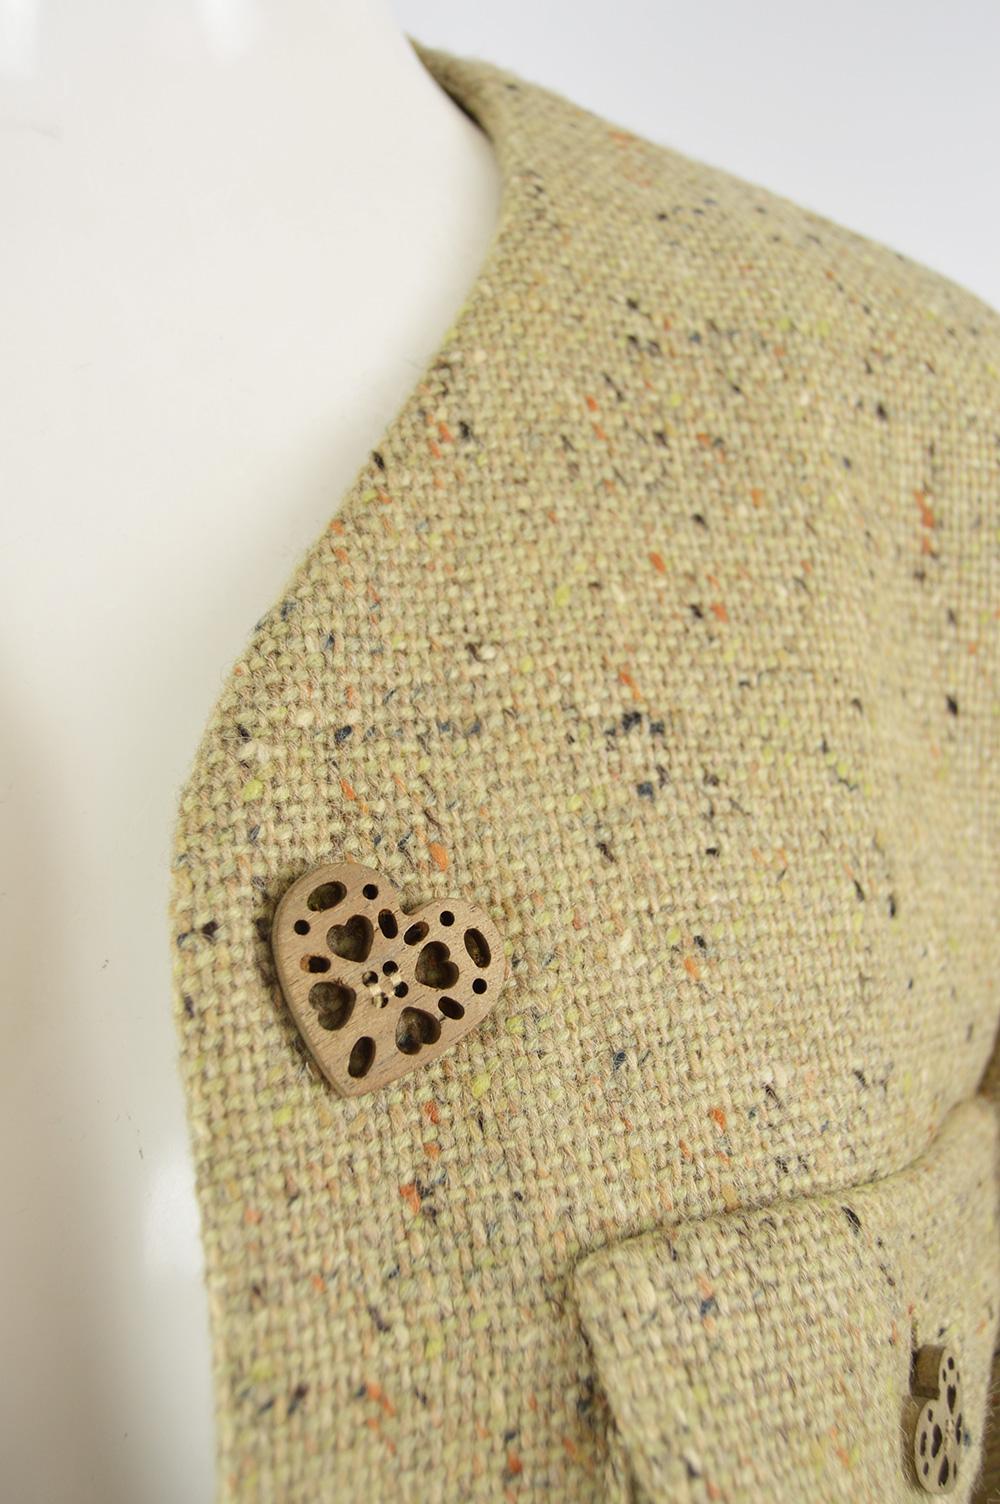 Moschino Vintage Wool Tweed 2 Piece Jacket & Skirt Suit with Heart Button, 1990s In Excellent Condition For Sale In Doncaster, South Yorkshire